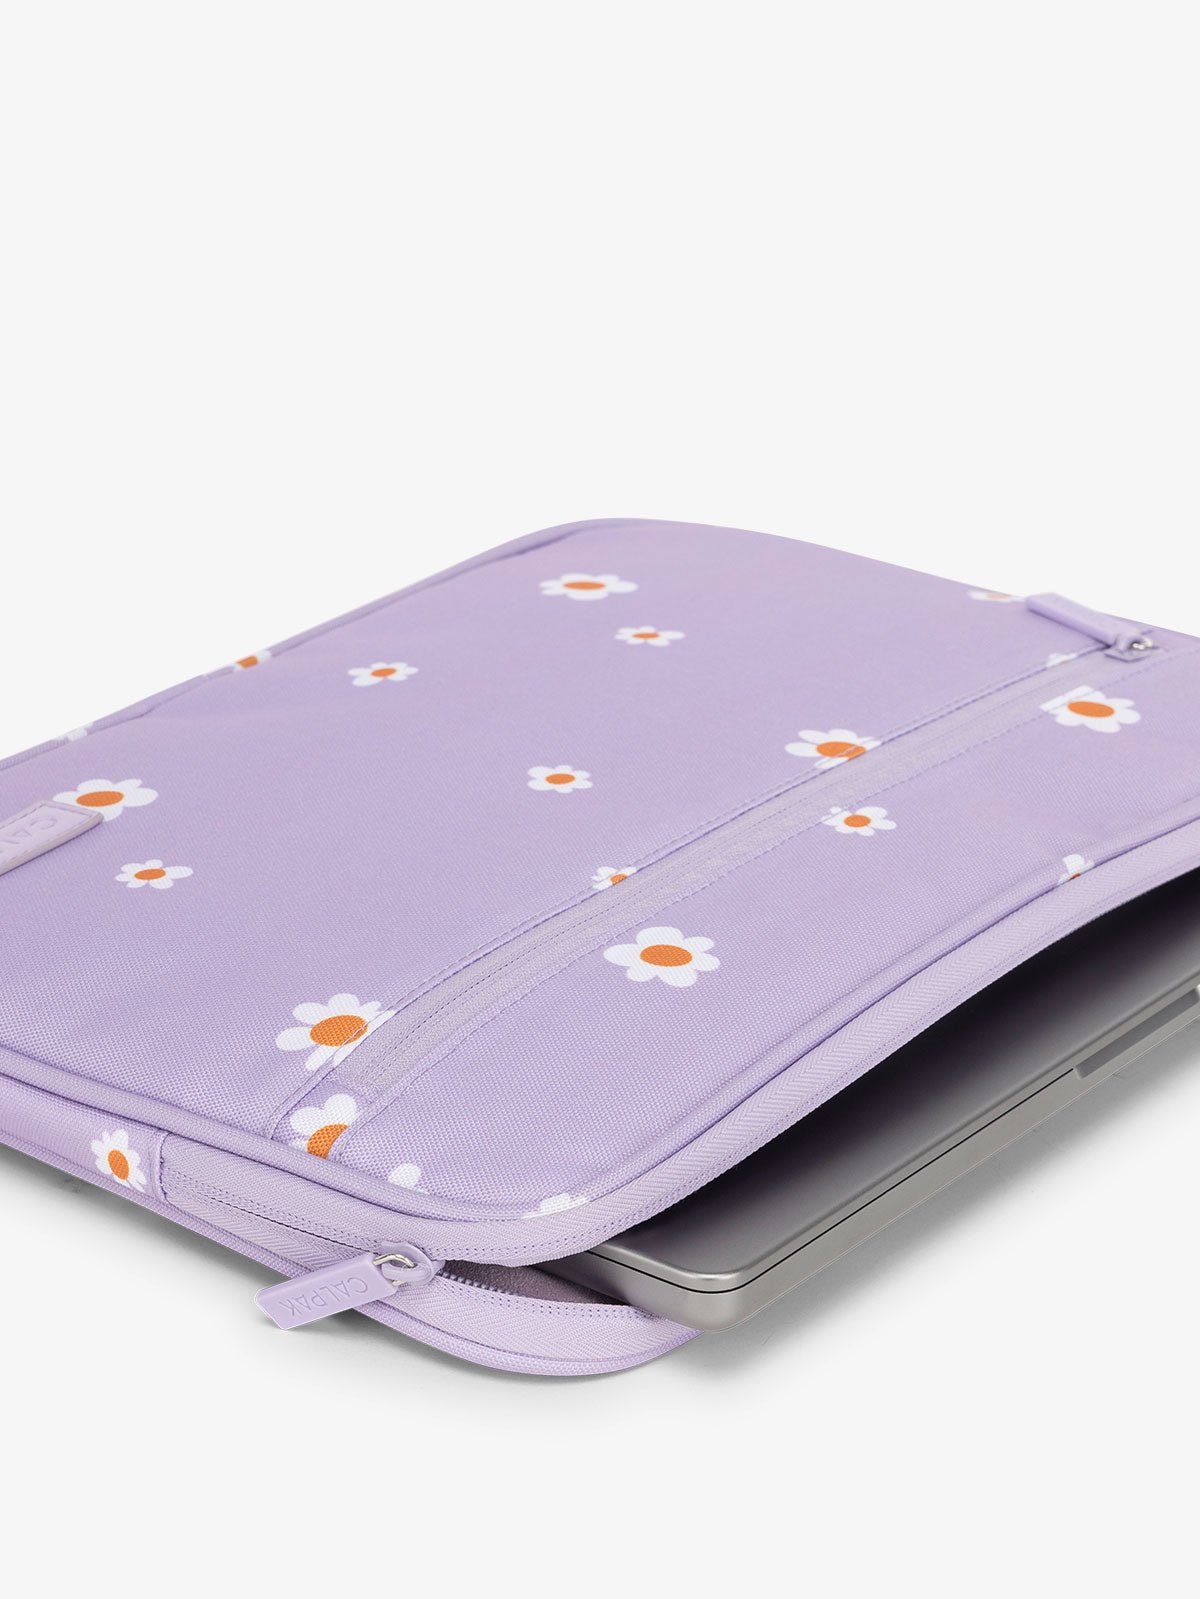 CALPAK 15-17" laptop sleeve with front zipper pouch in orchid fields